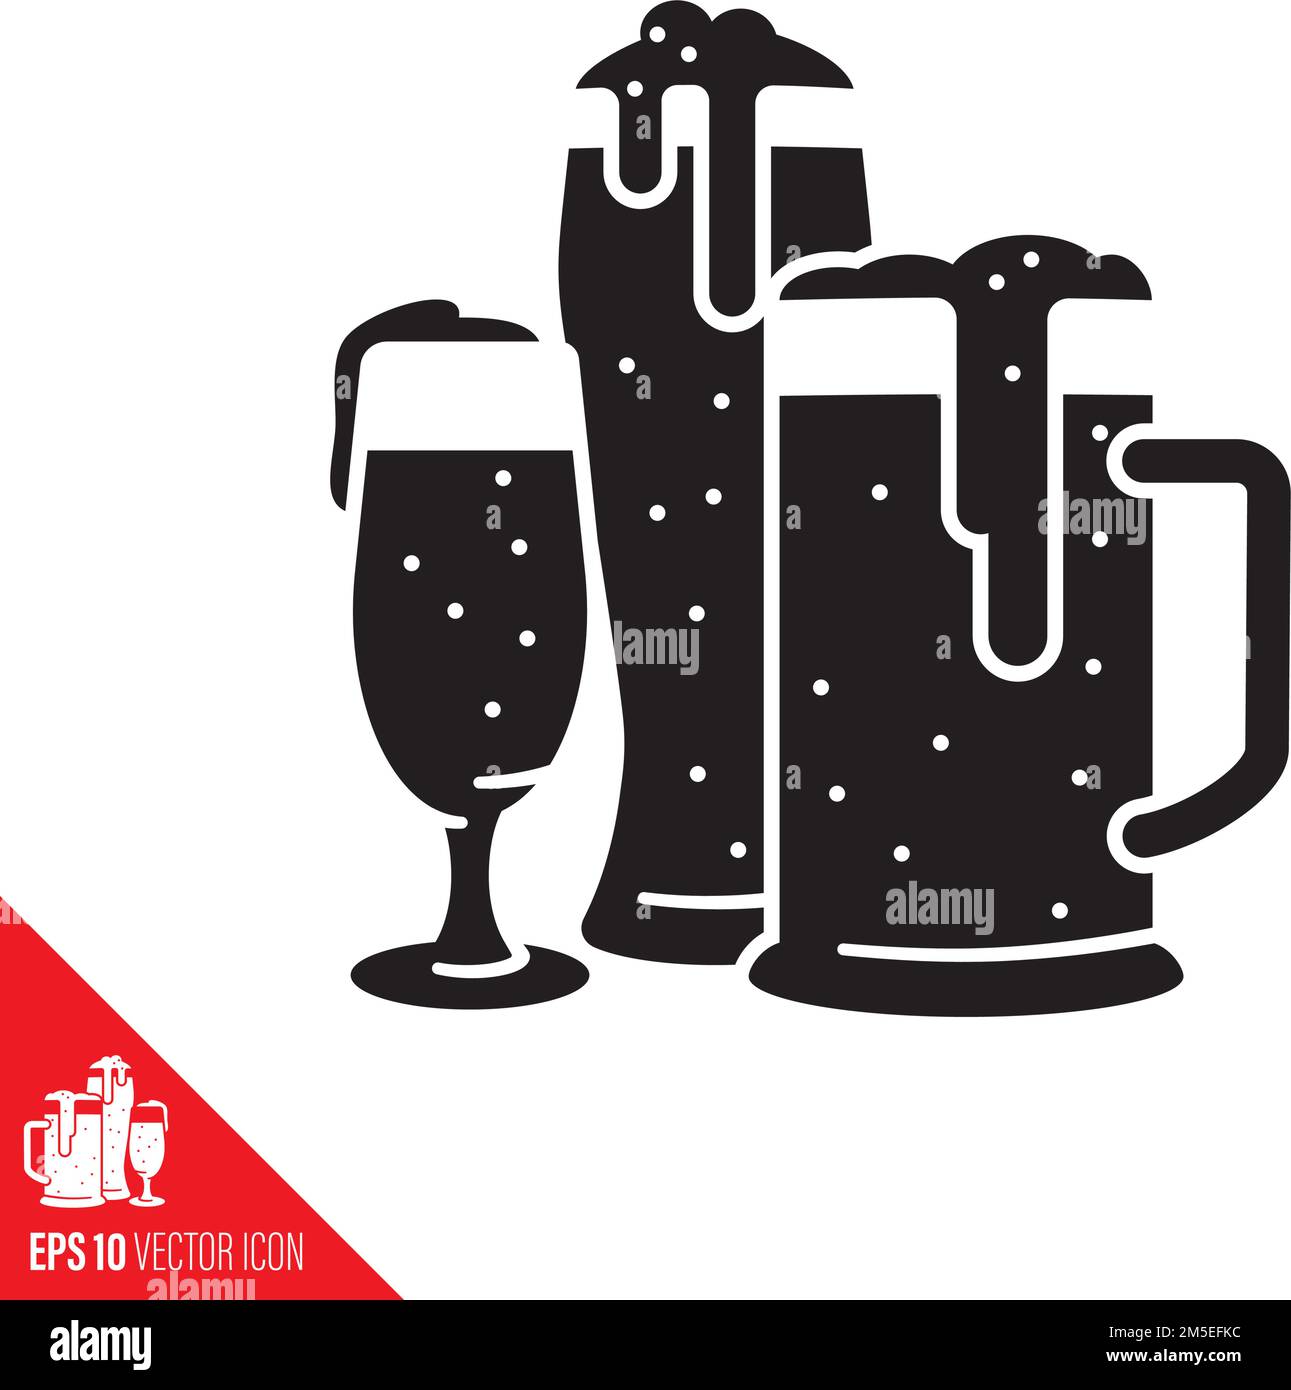 Variety of beer glasses vector icon. Traditionally brewed alcoholic beverages symbol. Stock Vector